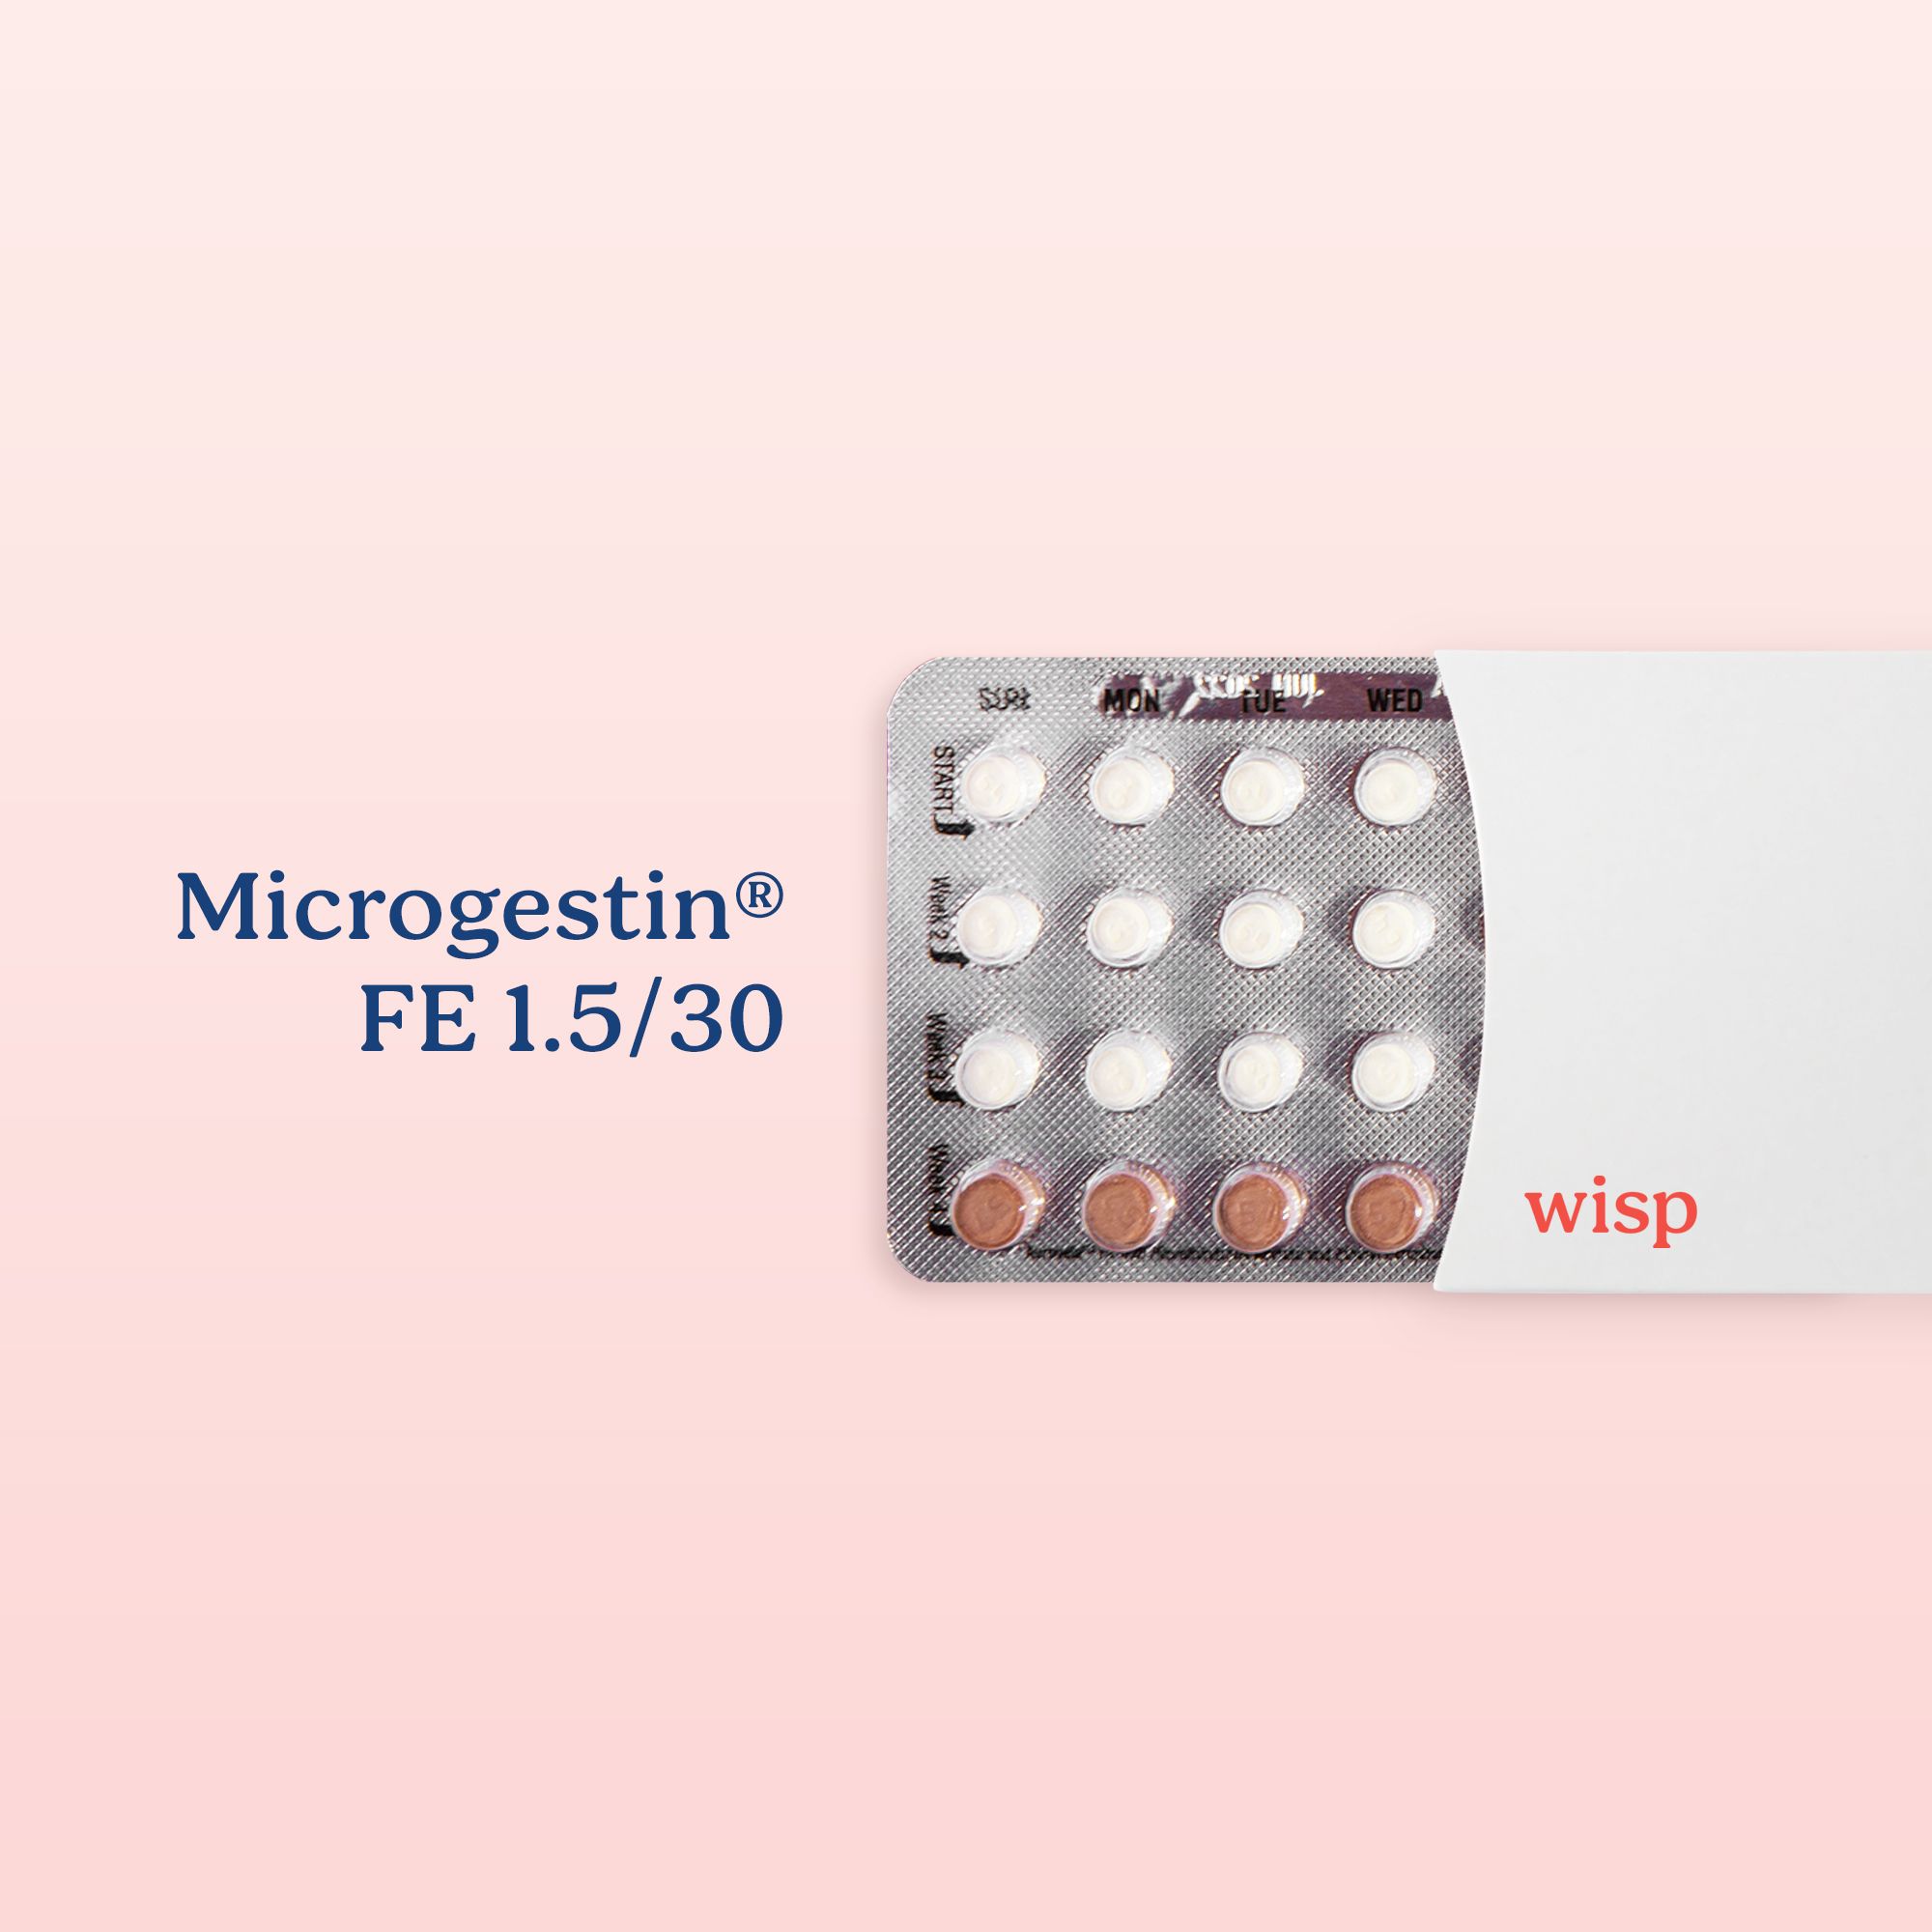 Packet of Microgestin birth control pills on a pink background